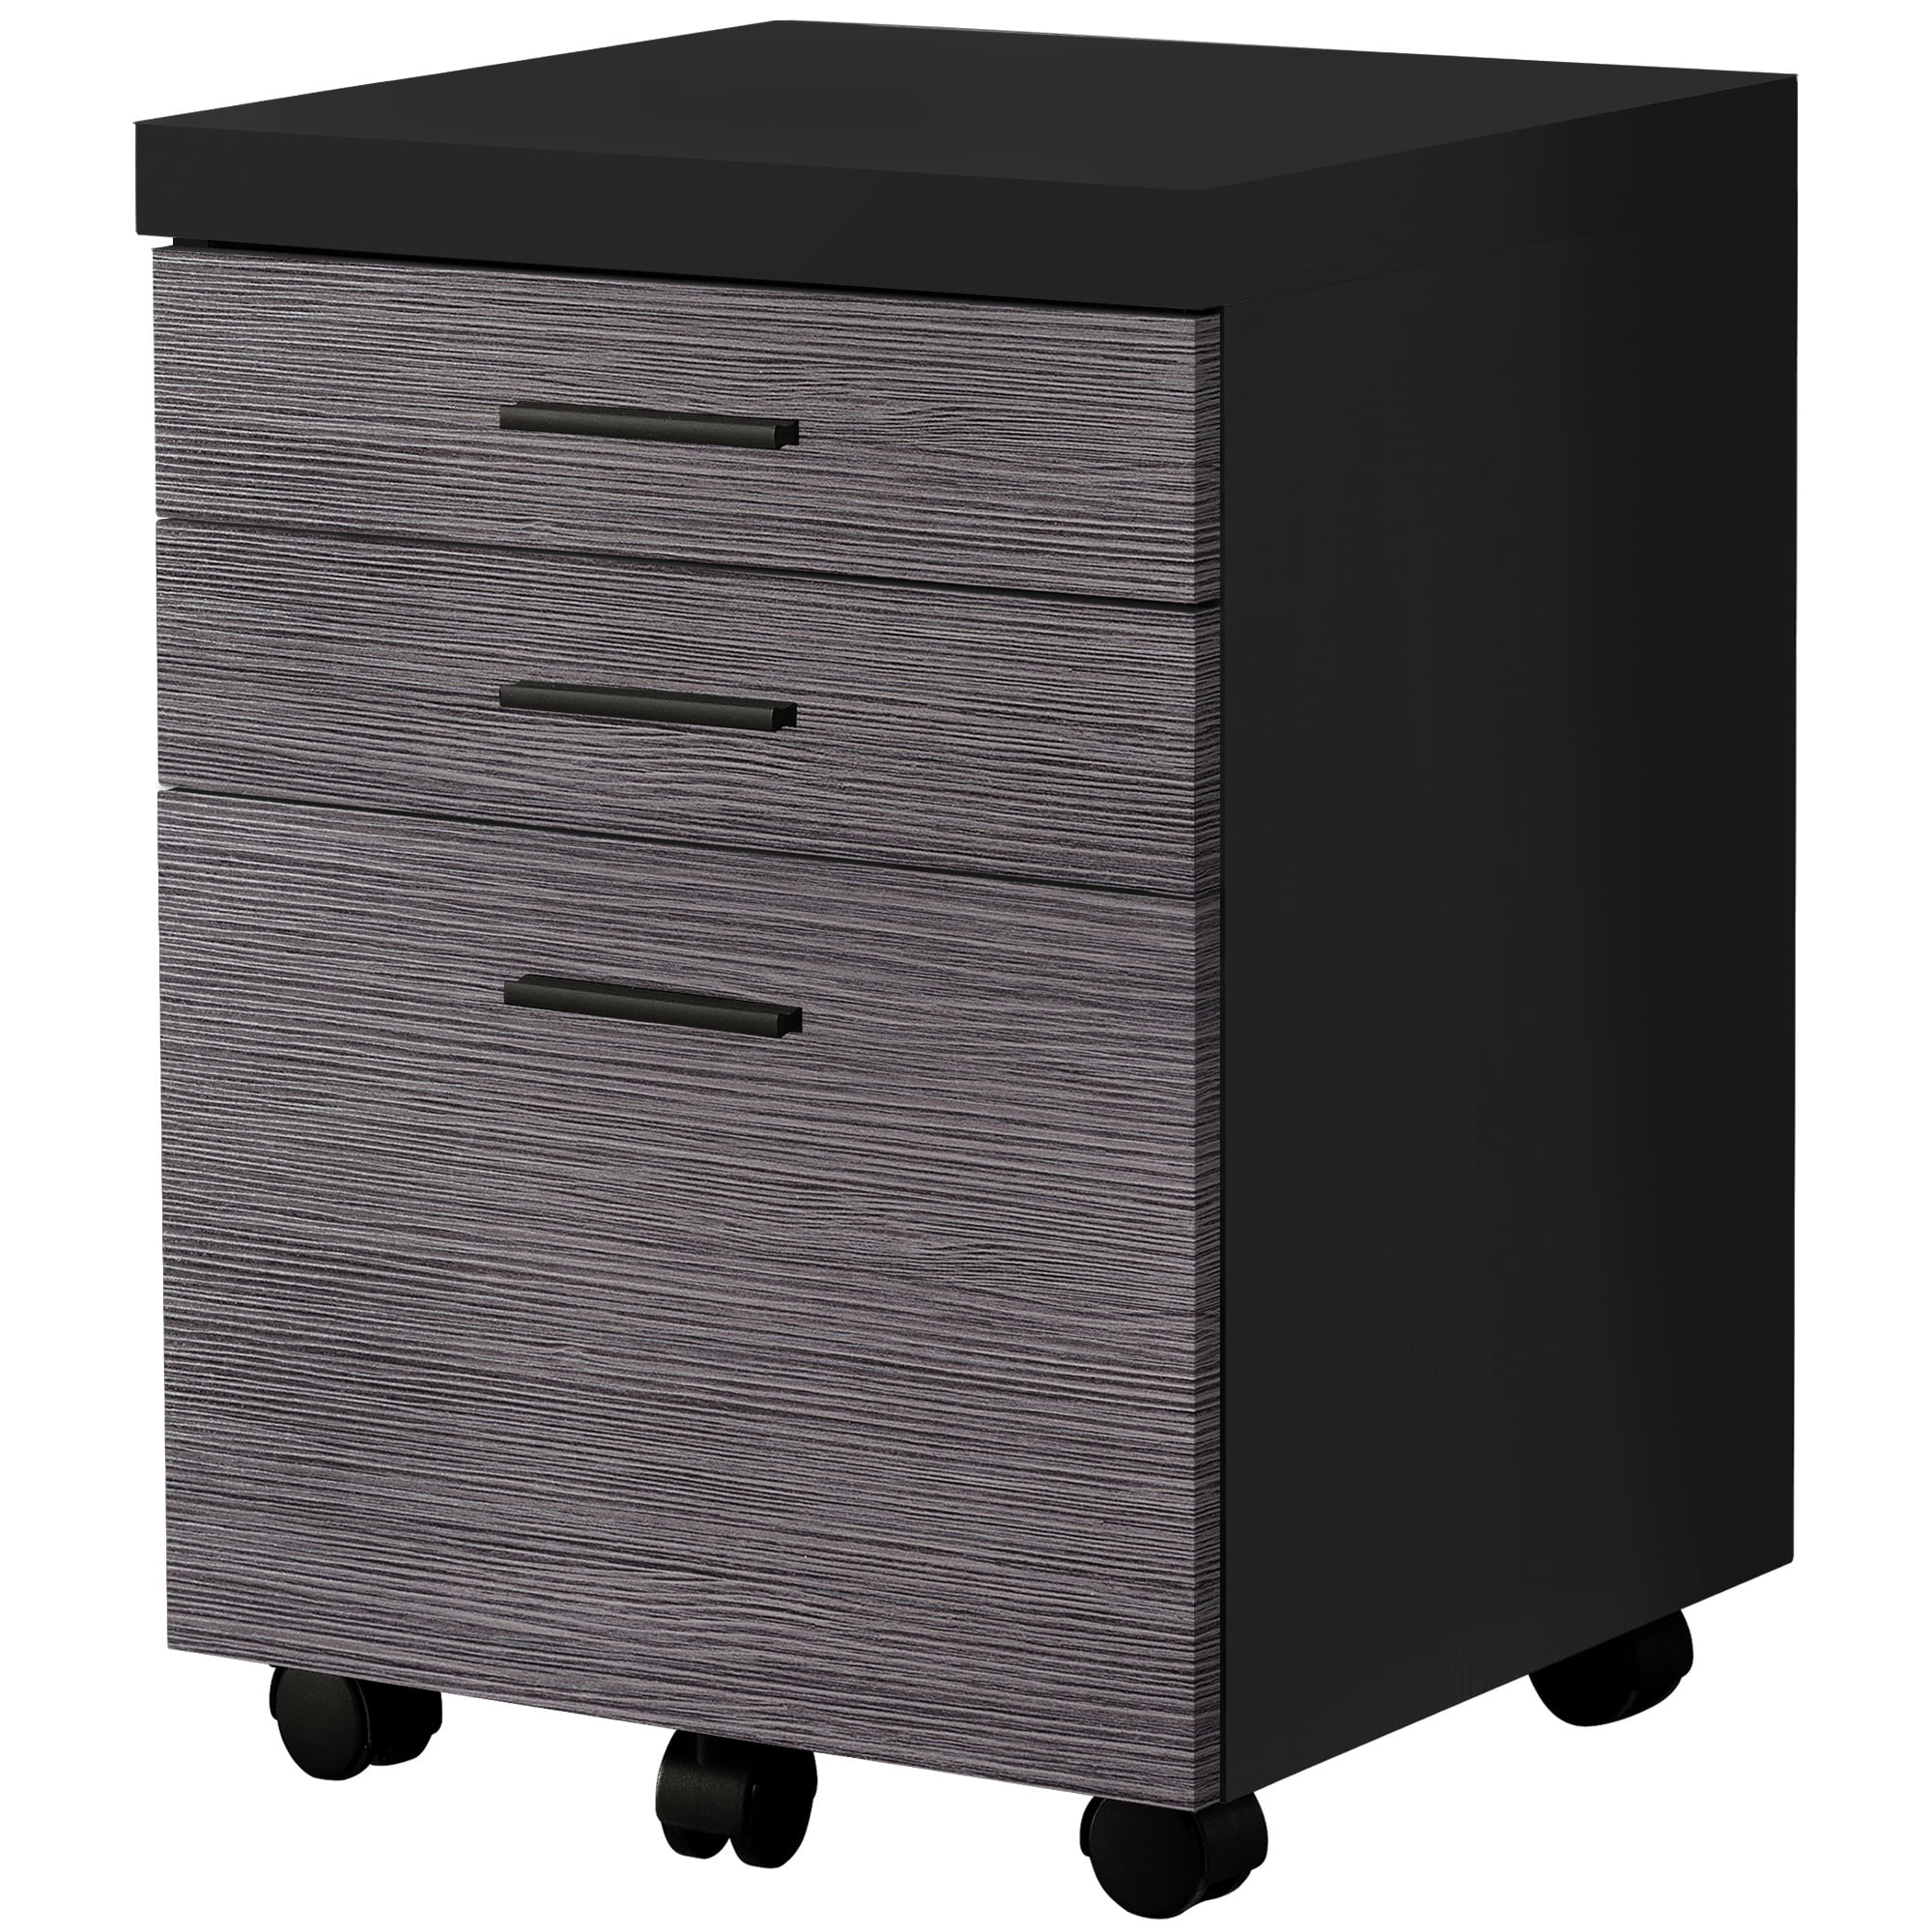 Details about   Monarch 3 Drawer Rolling Portable Filing Cabinet White 